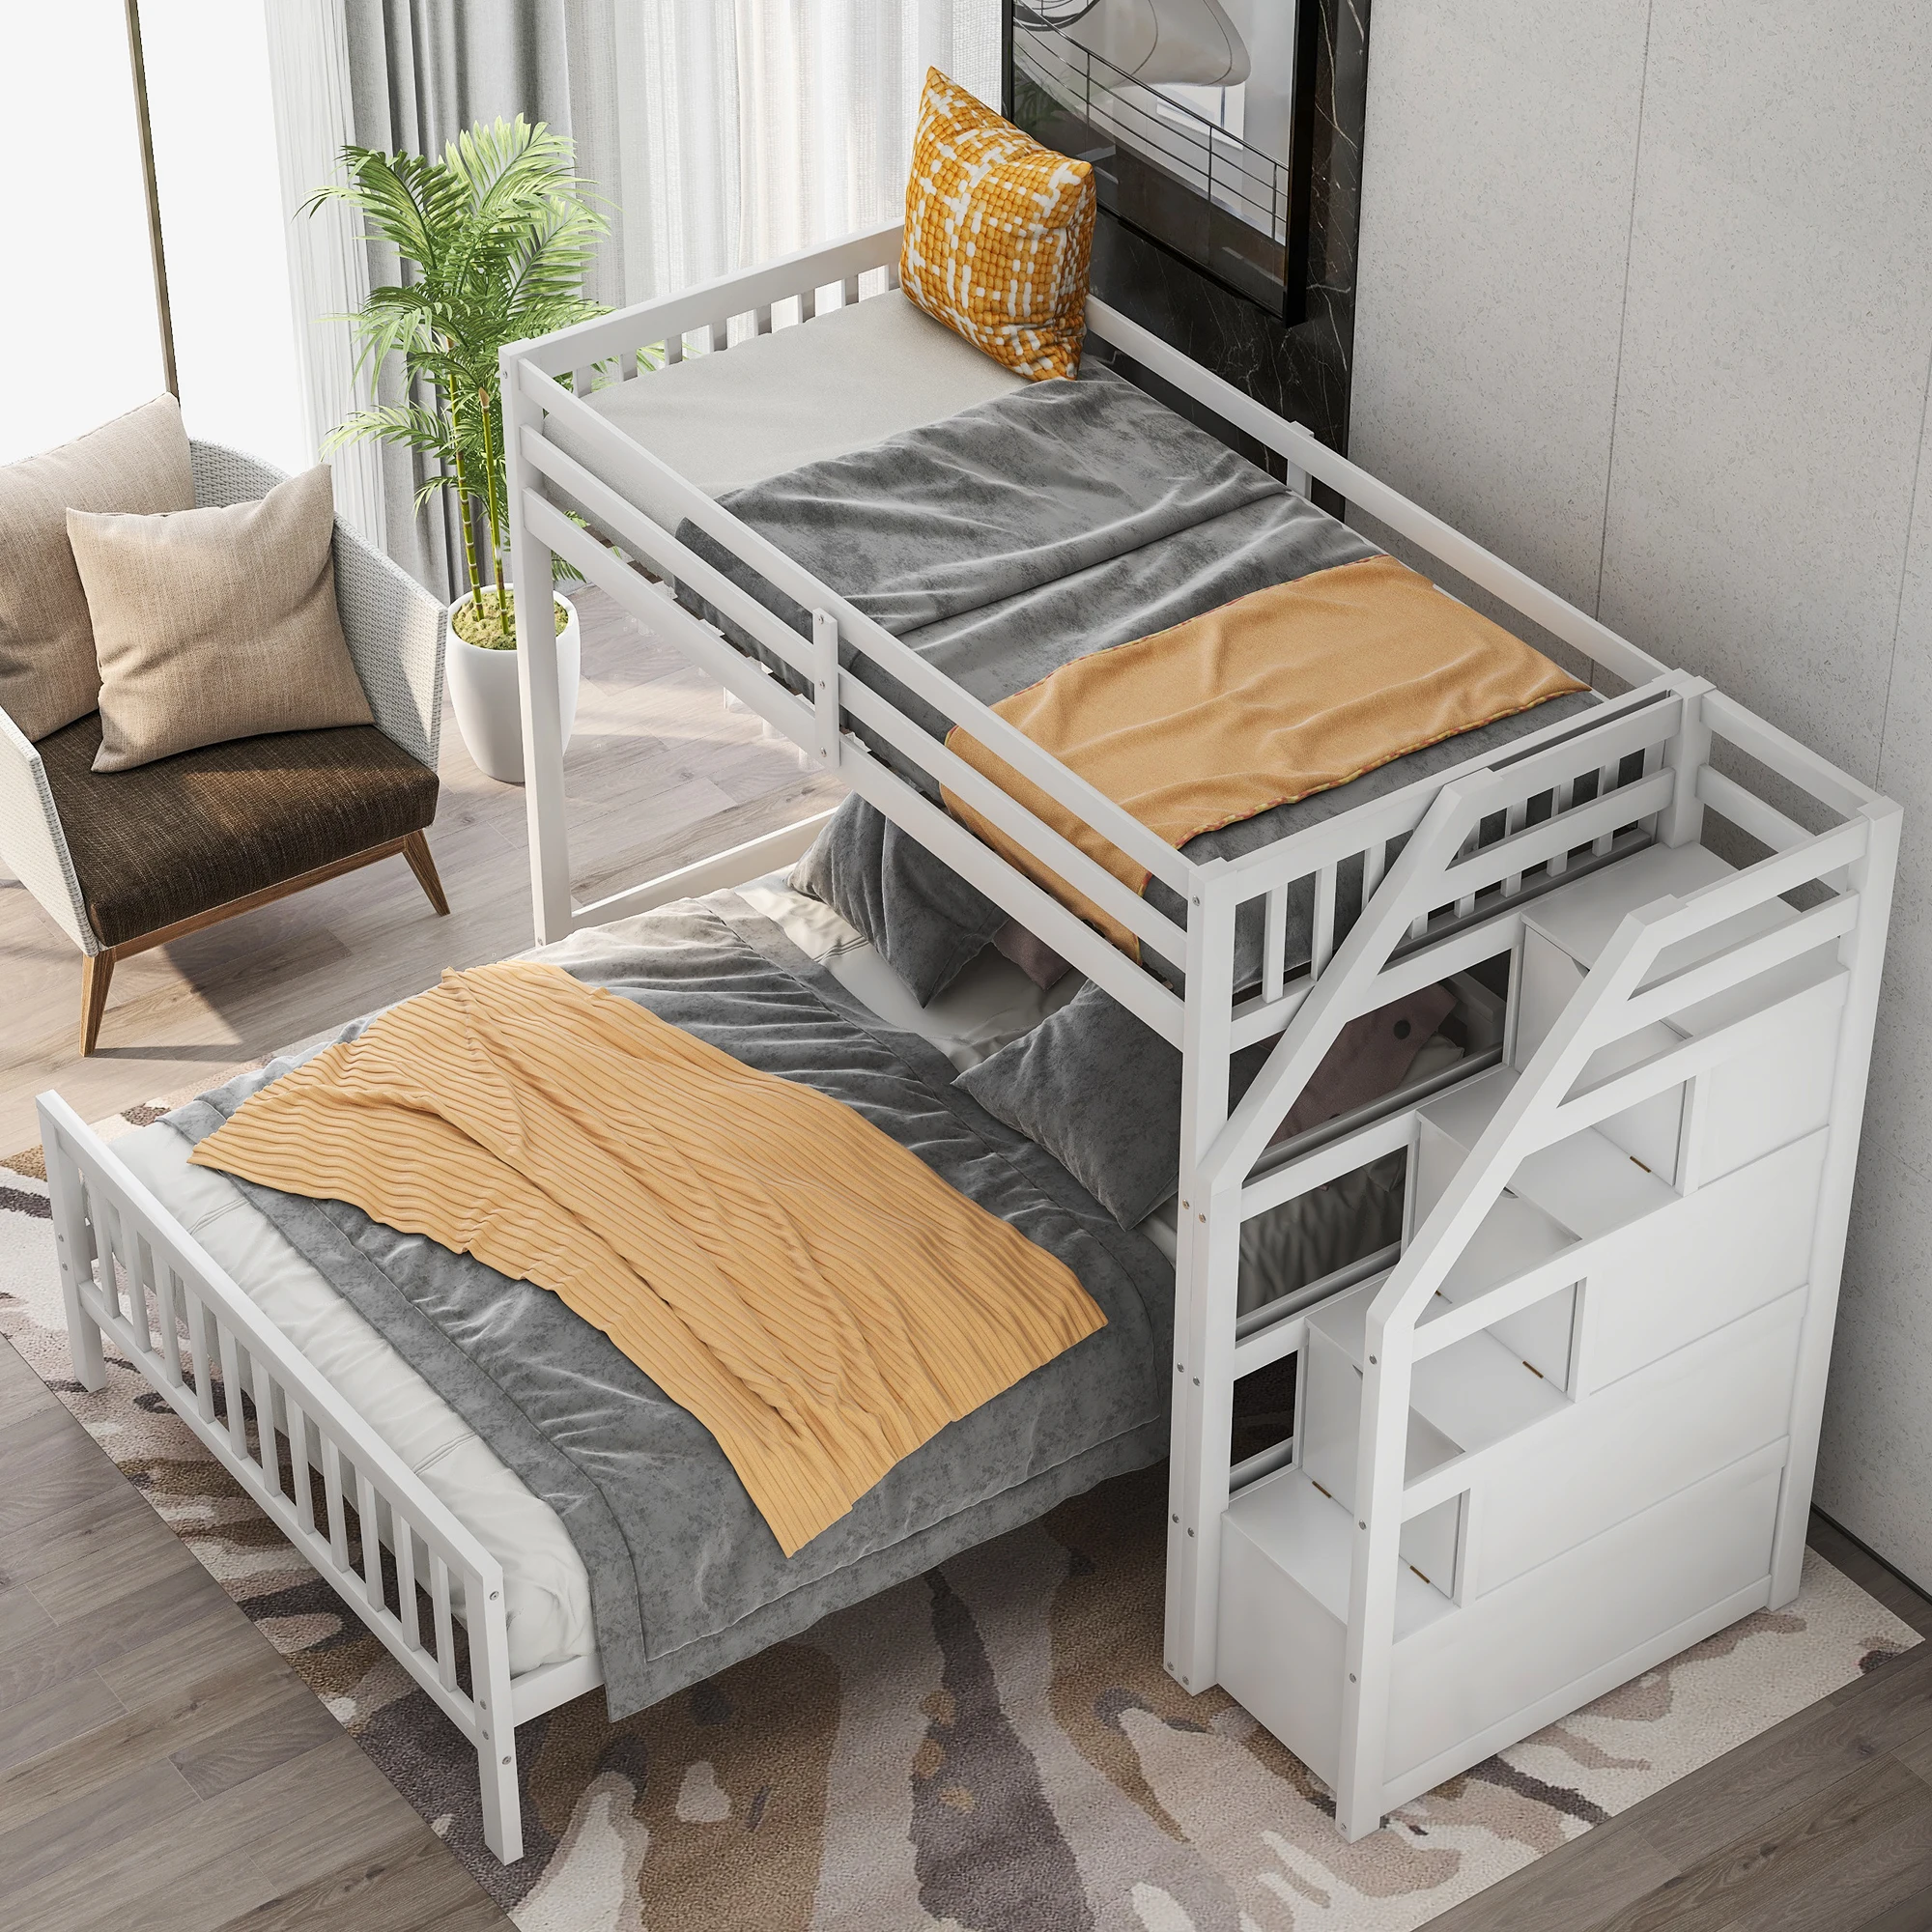 small double bunk beds